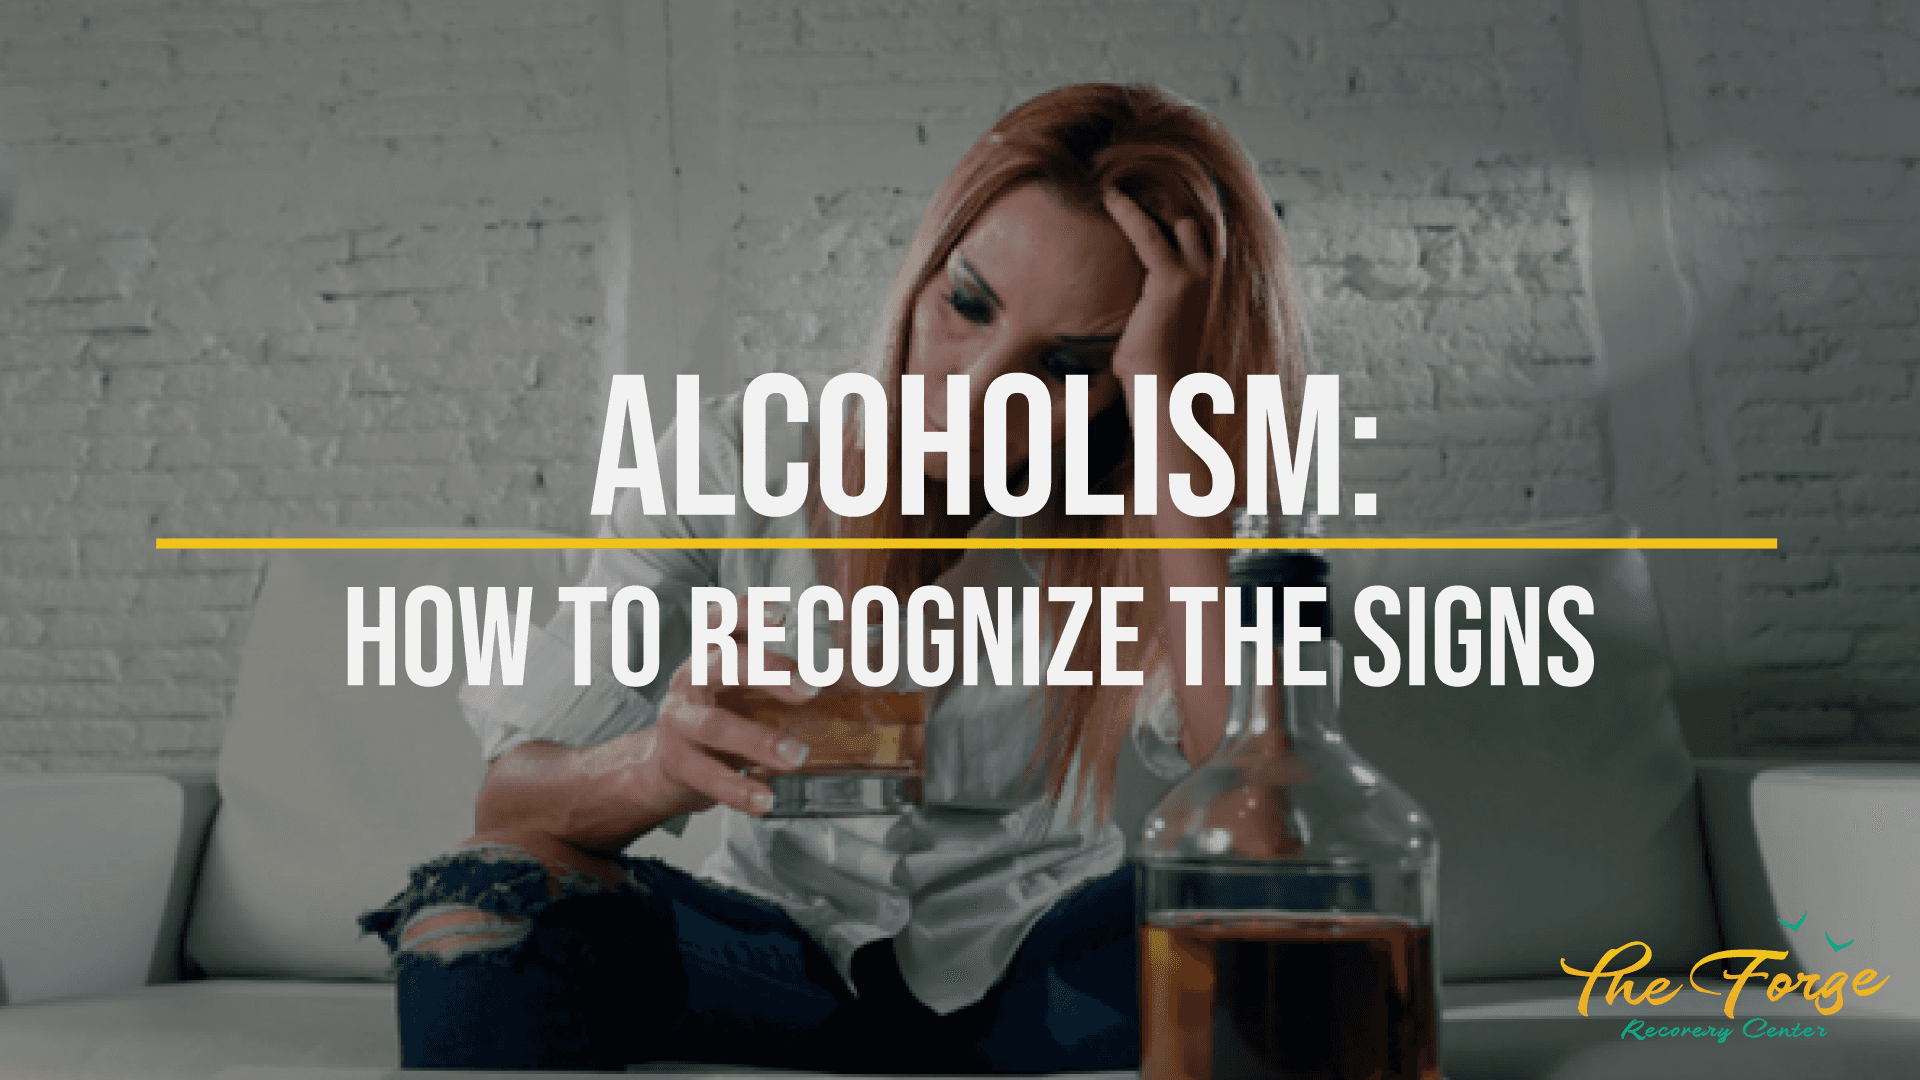 What Are The Signs Of Alcoholism?